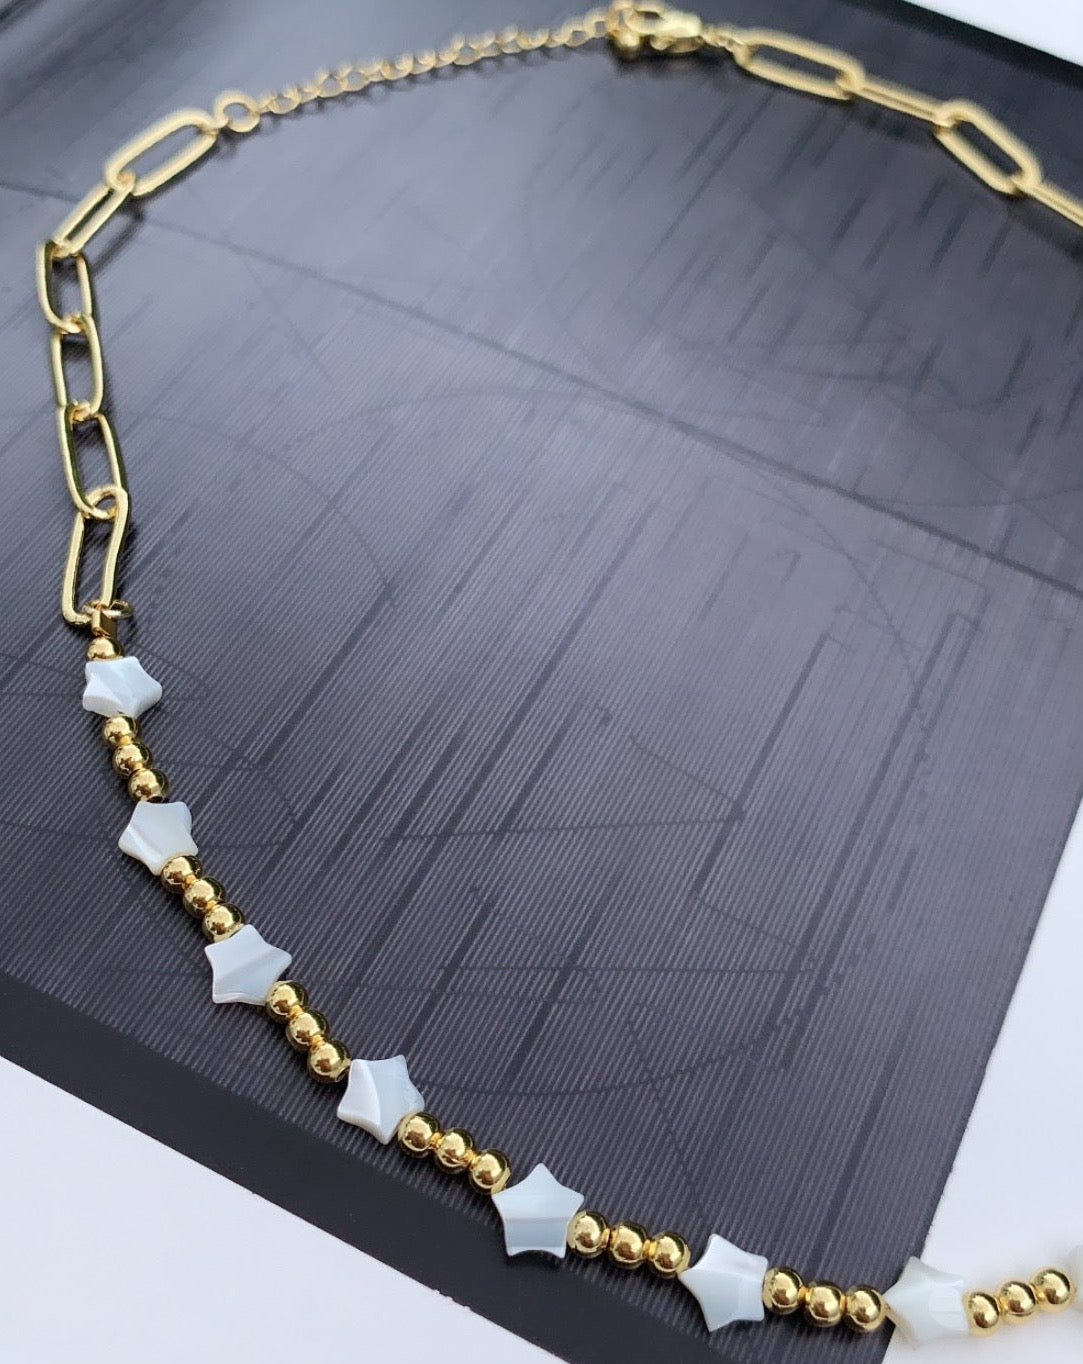 Star And Gold Choker - LimaLimón Store